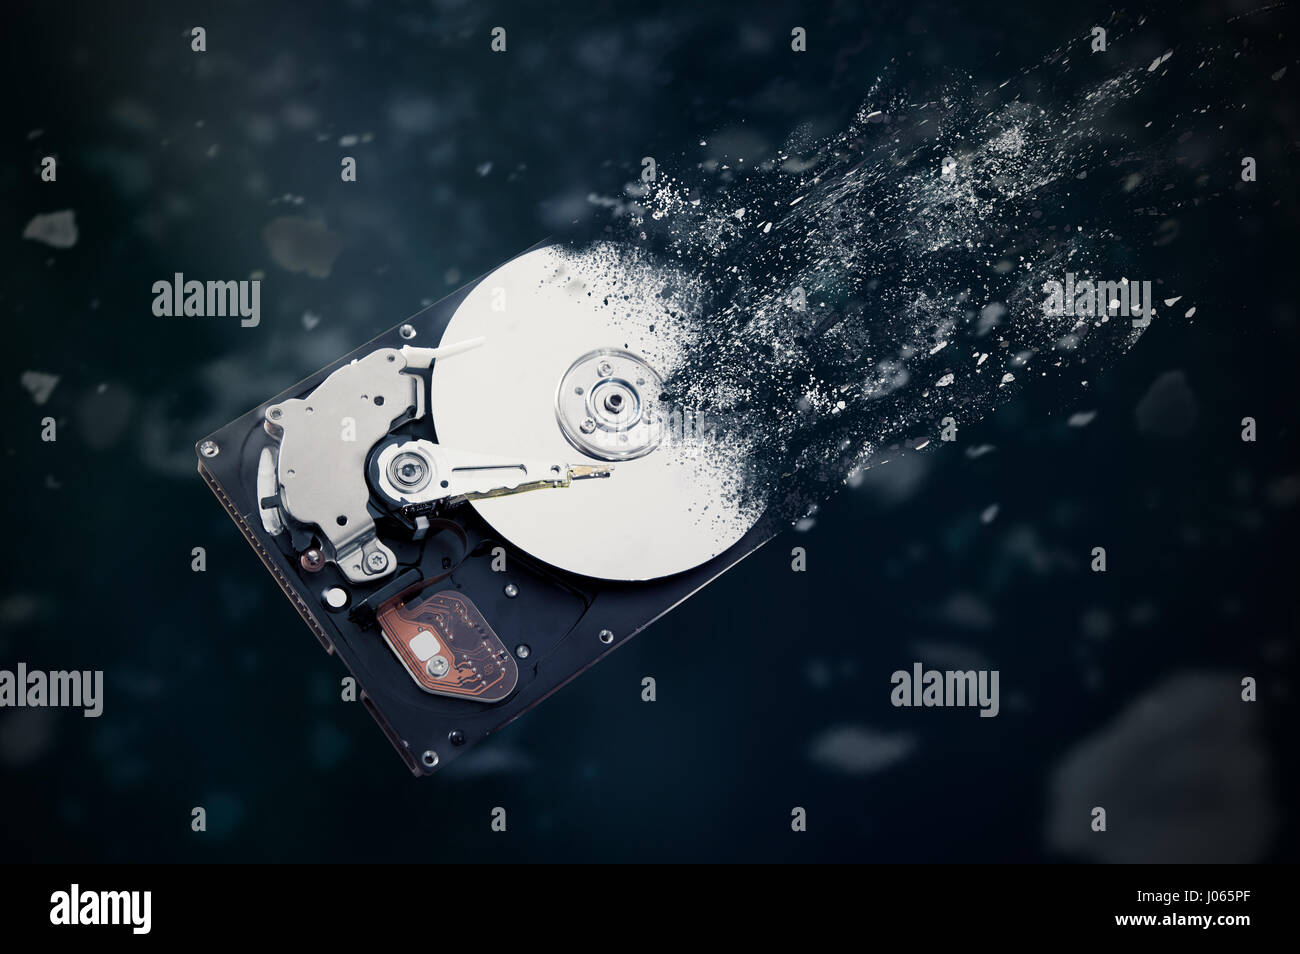 The old hard disk drive is disintegrating in space. Conception of passage of time and obsolete technology Stock Photo